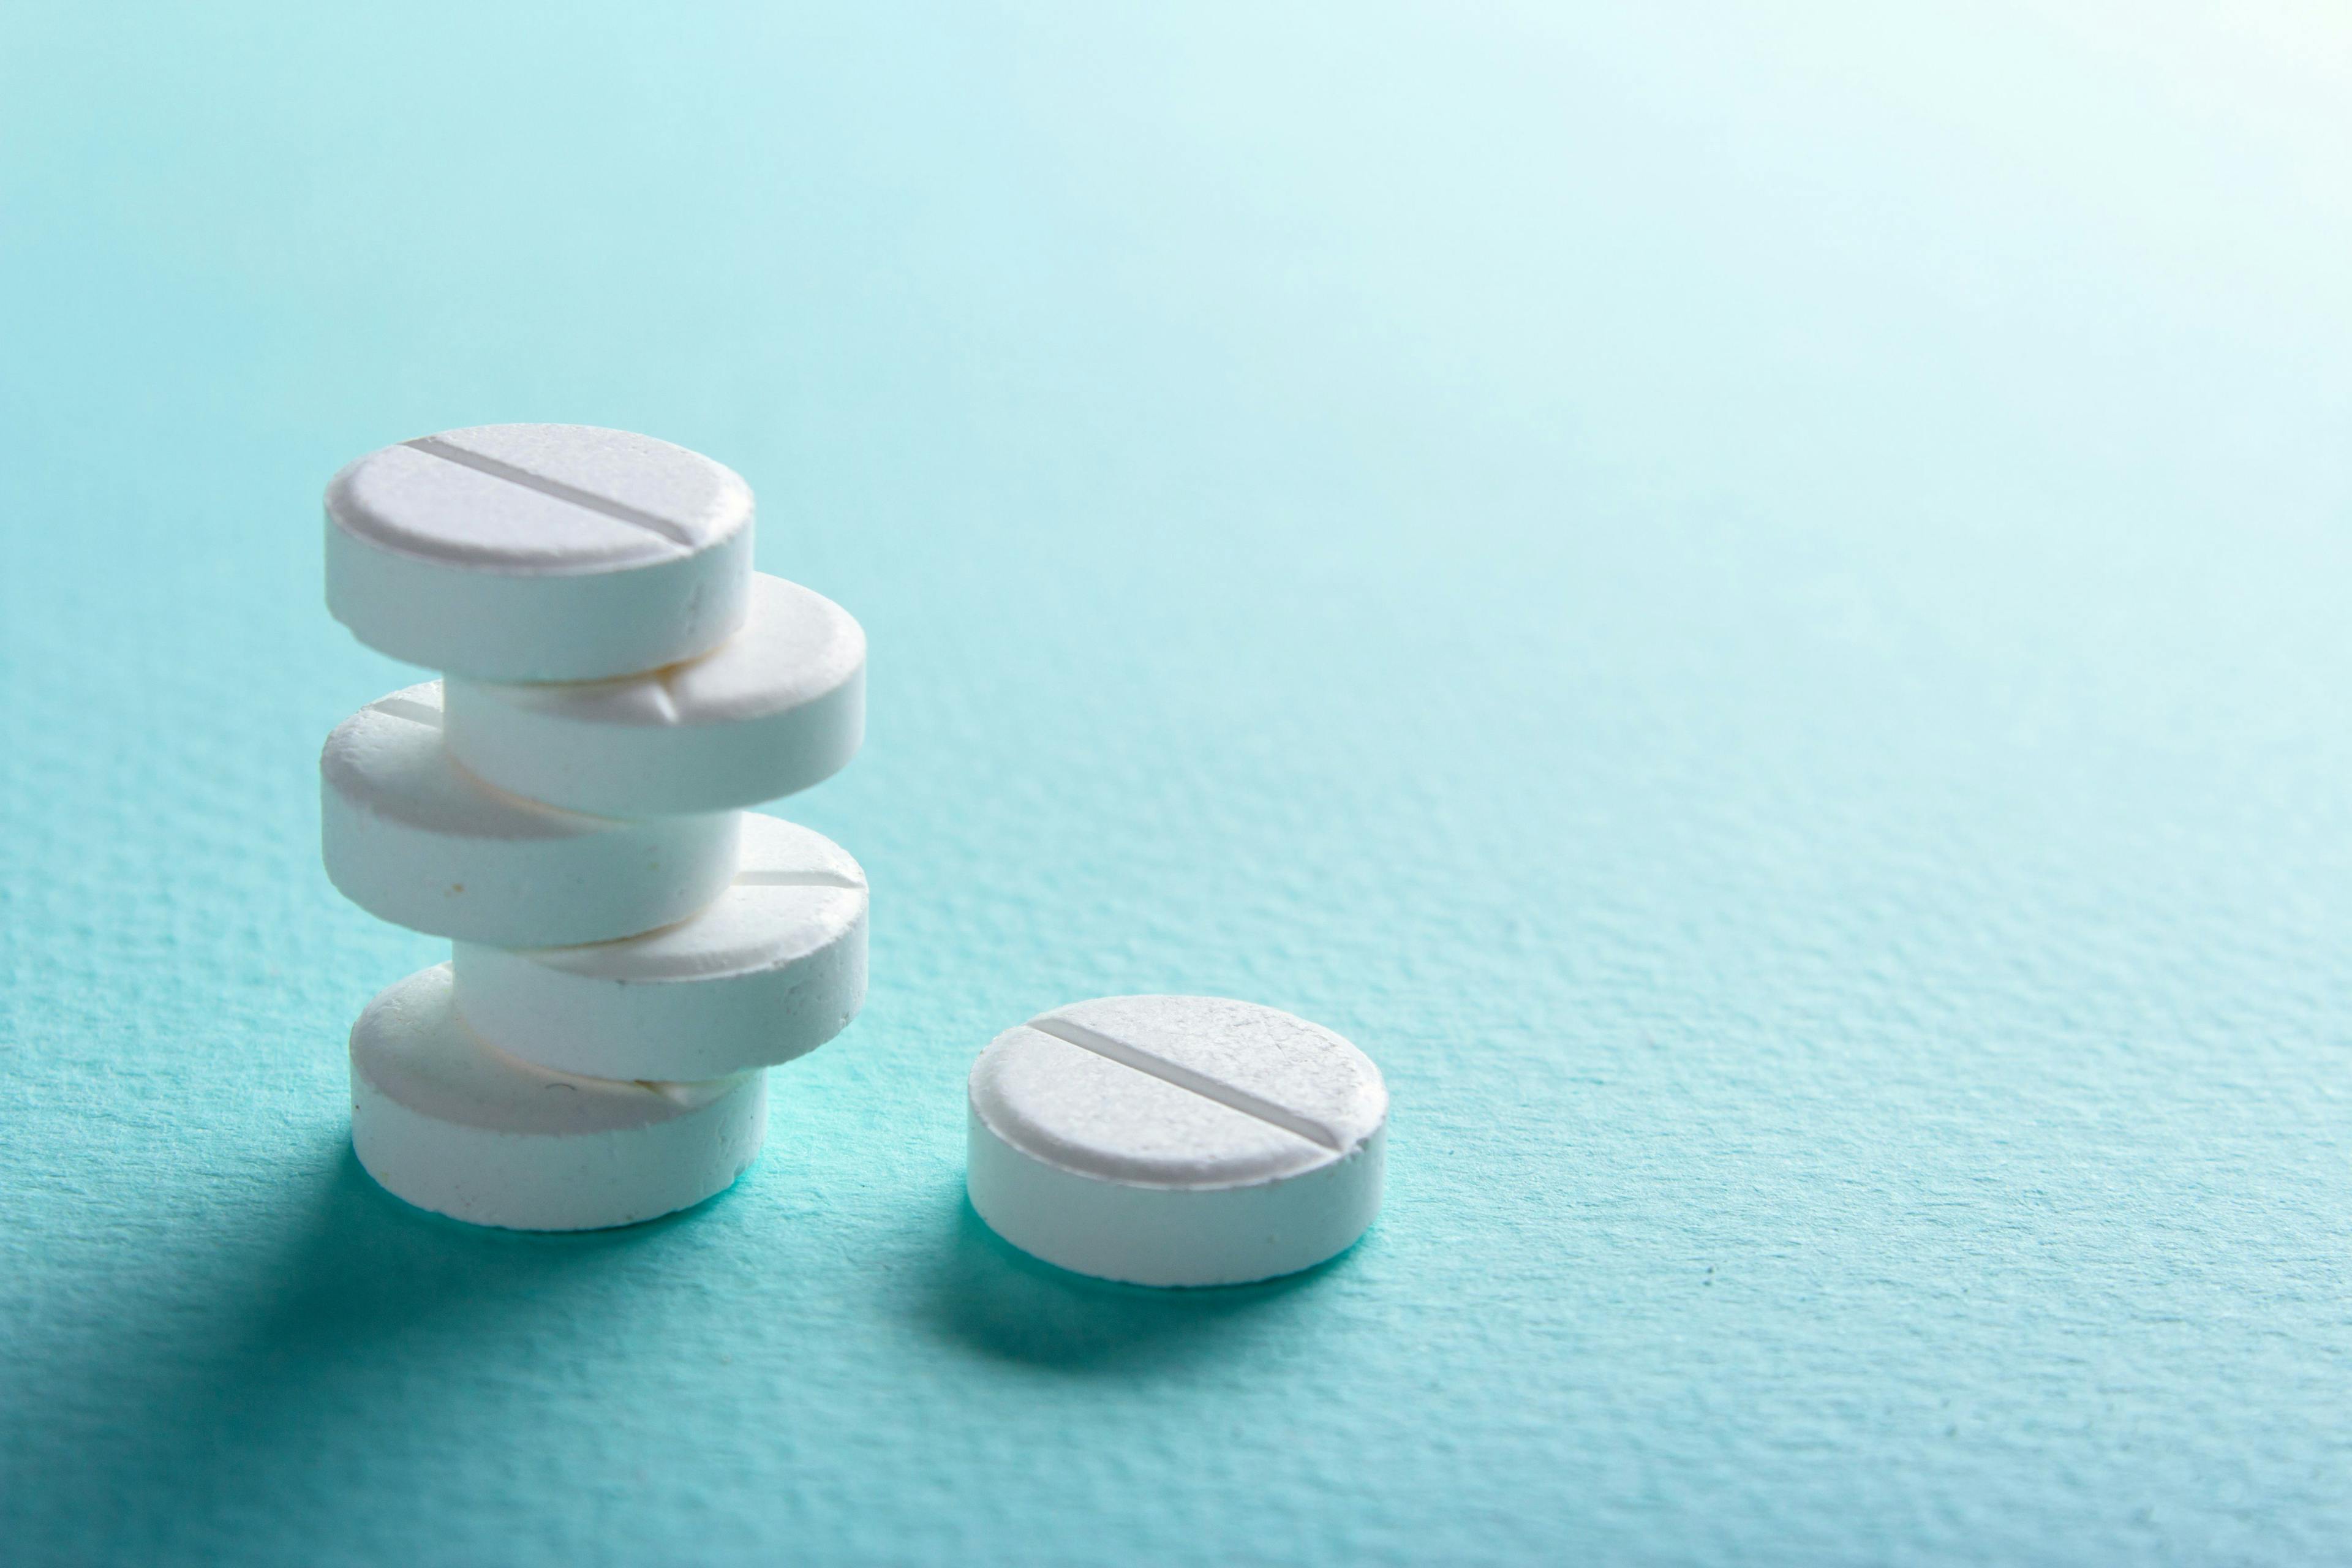 Aspirin Use May Reduce Risk of Colorectal Cancer